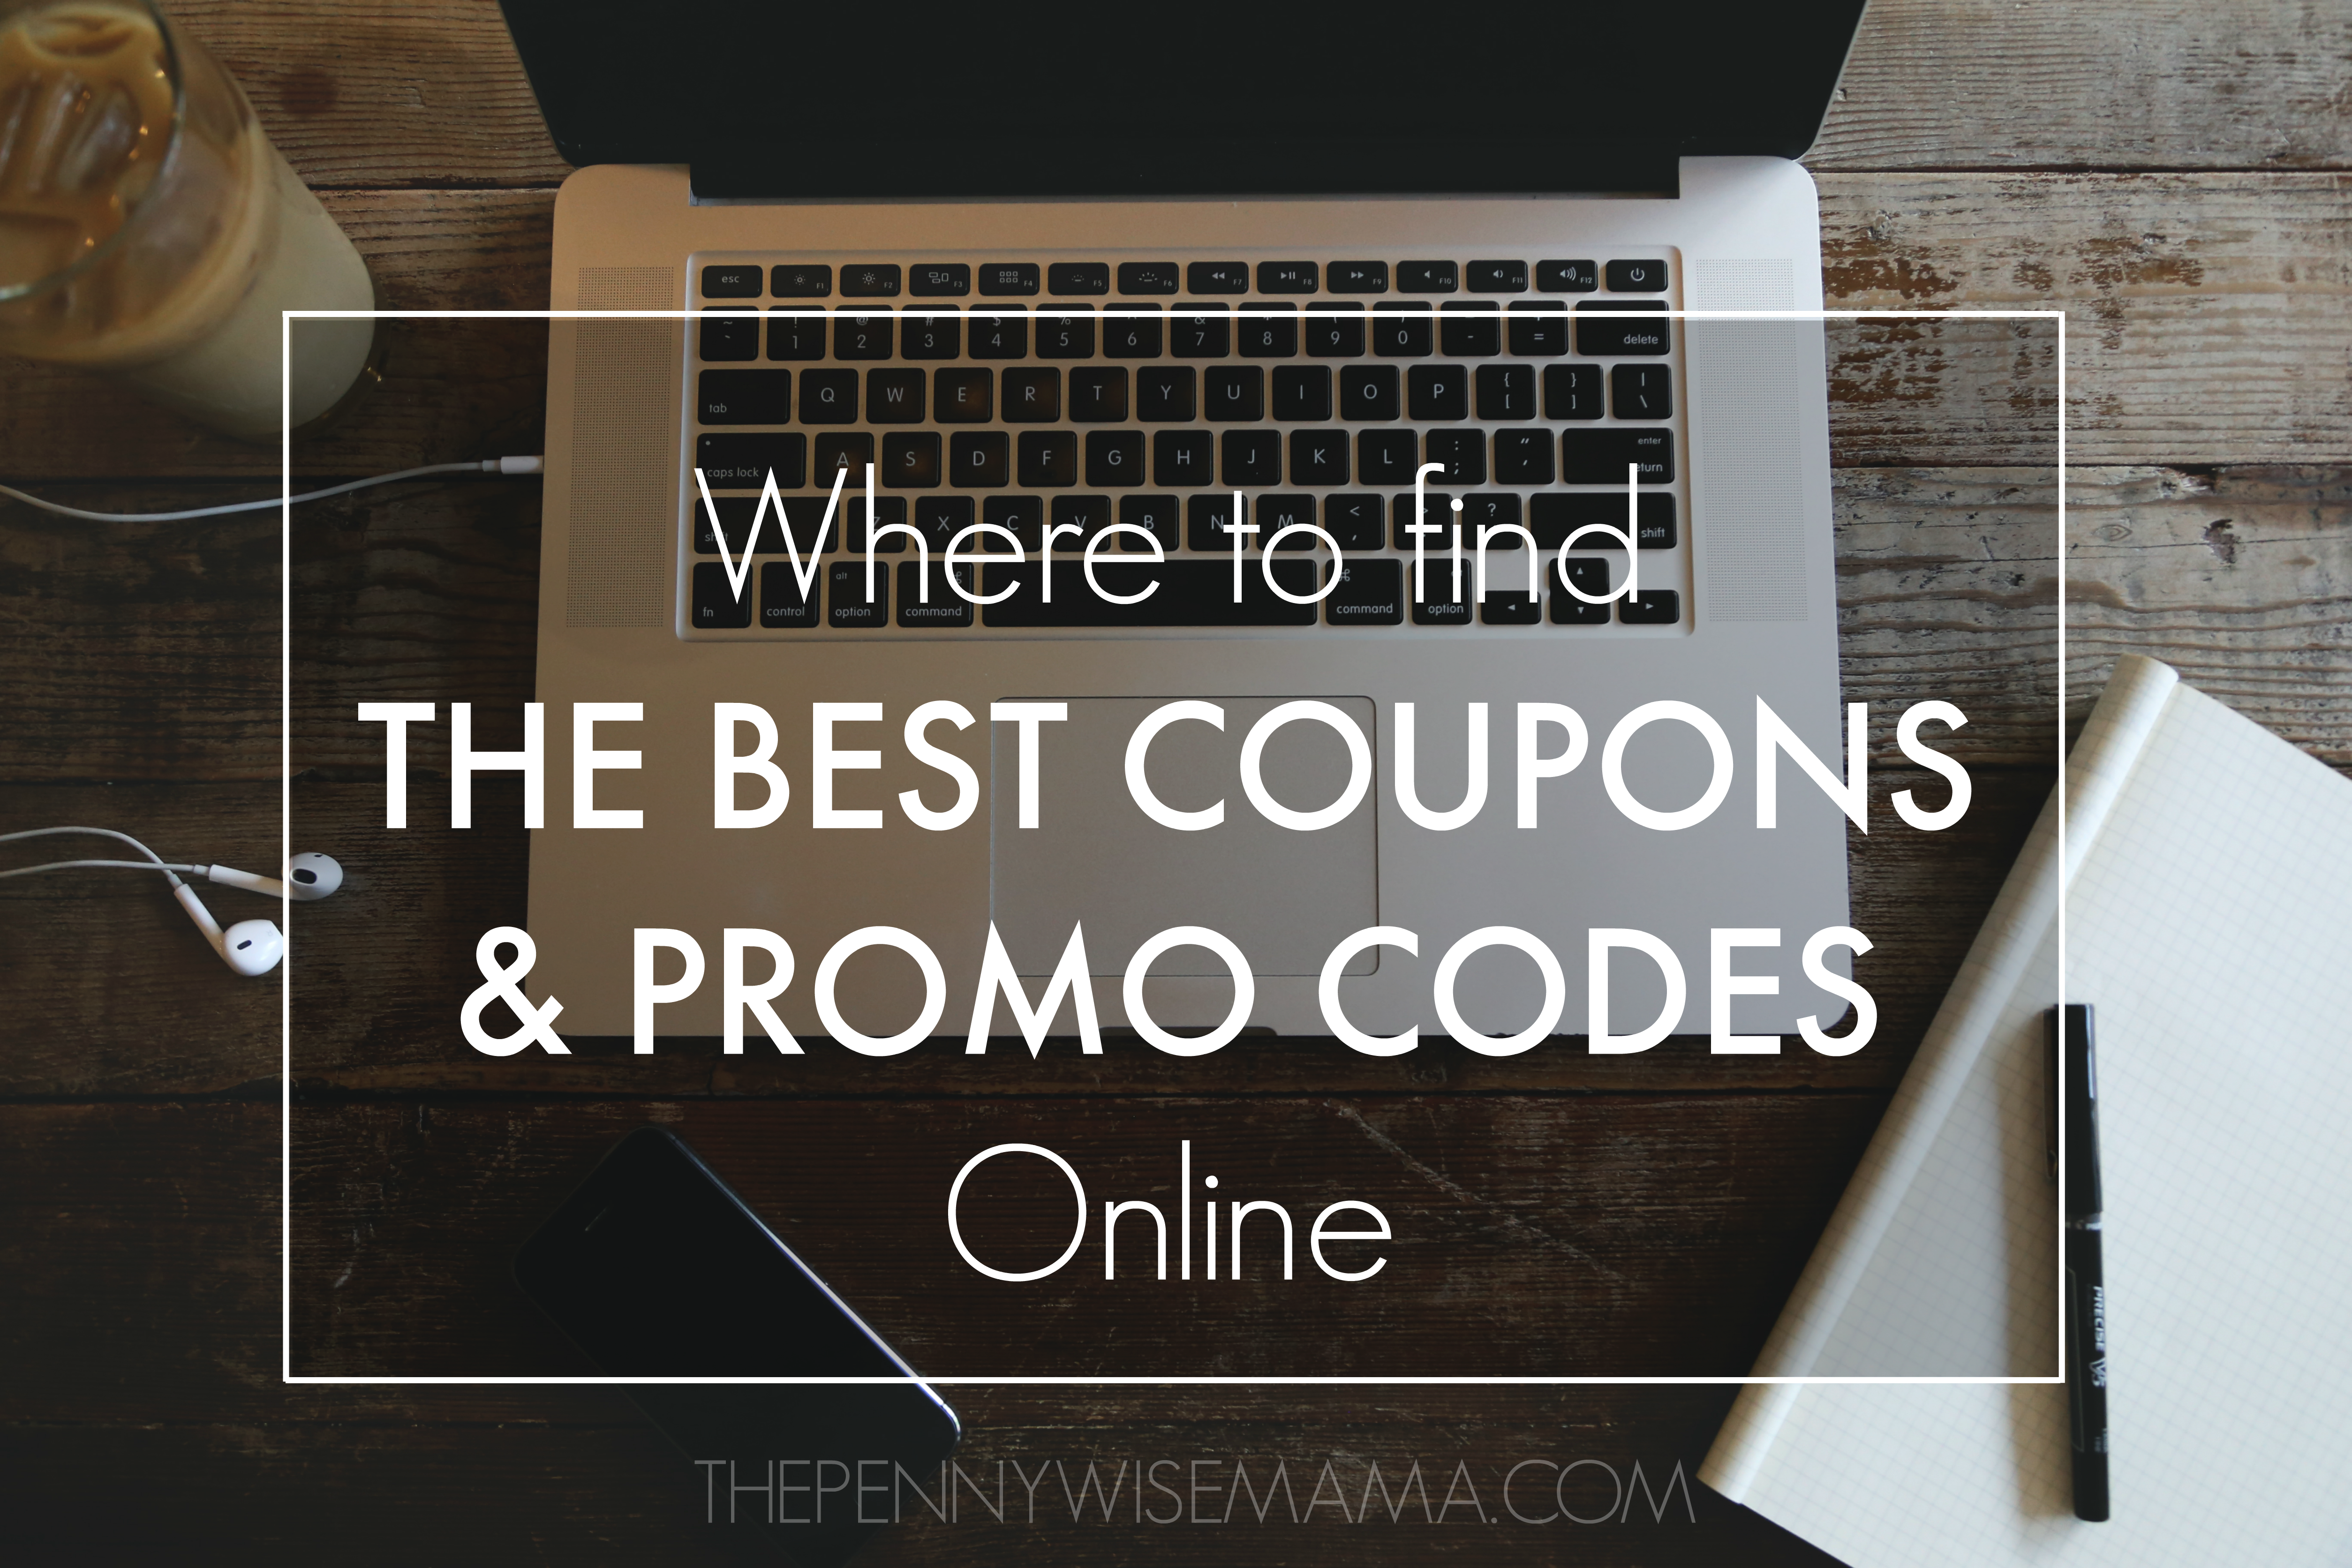 Where to Find the Best Coupons & Promo Codes Online